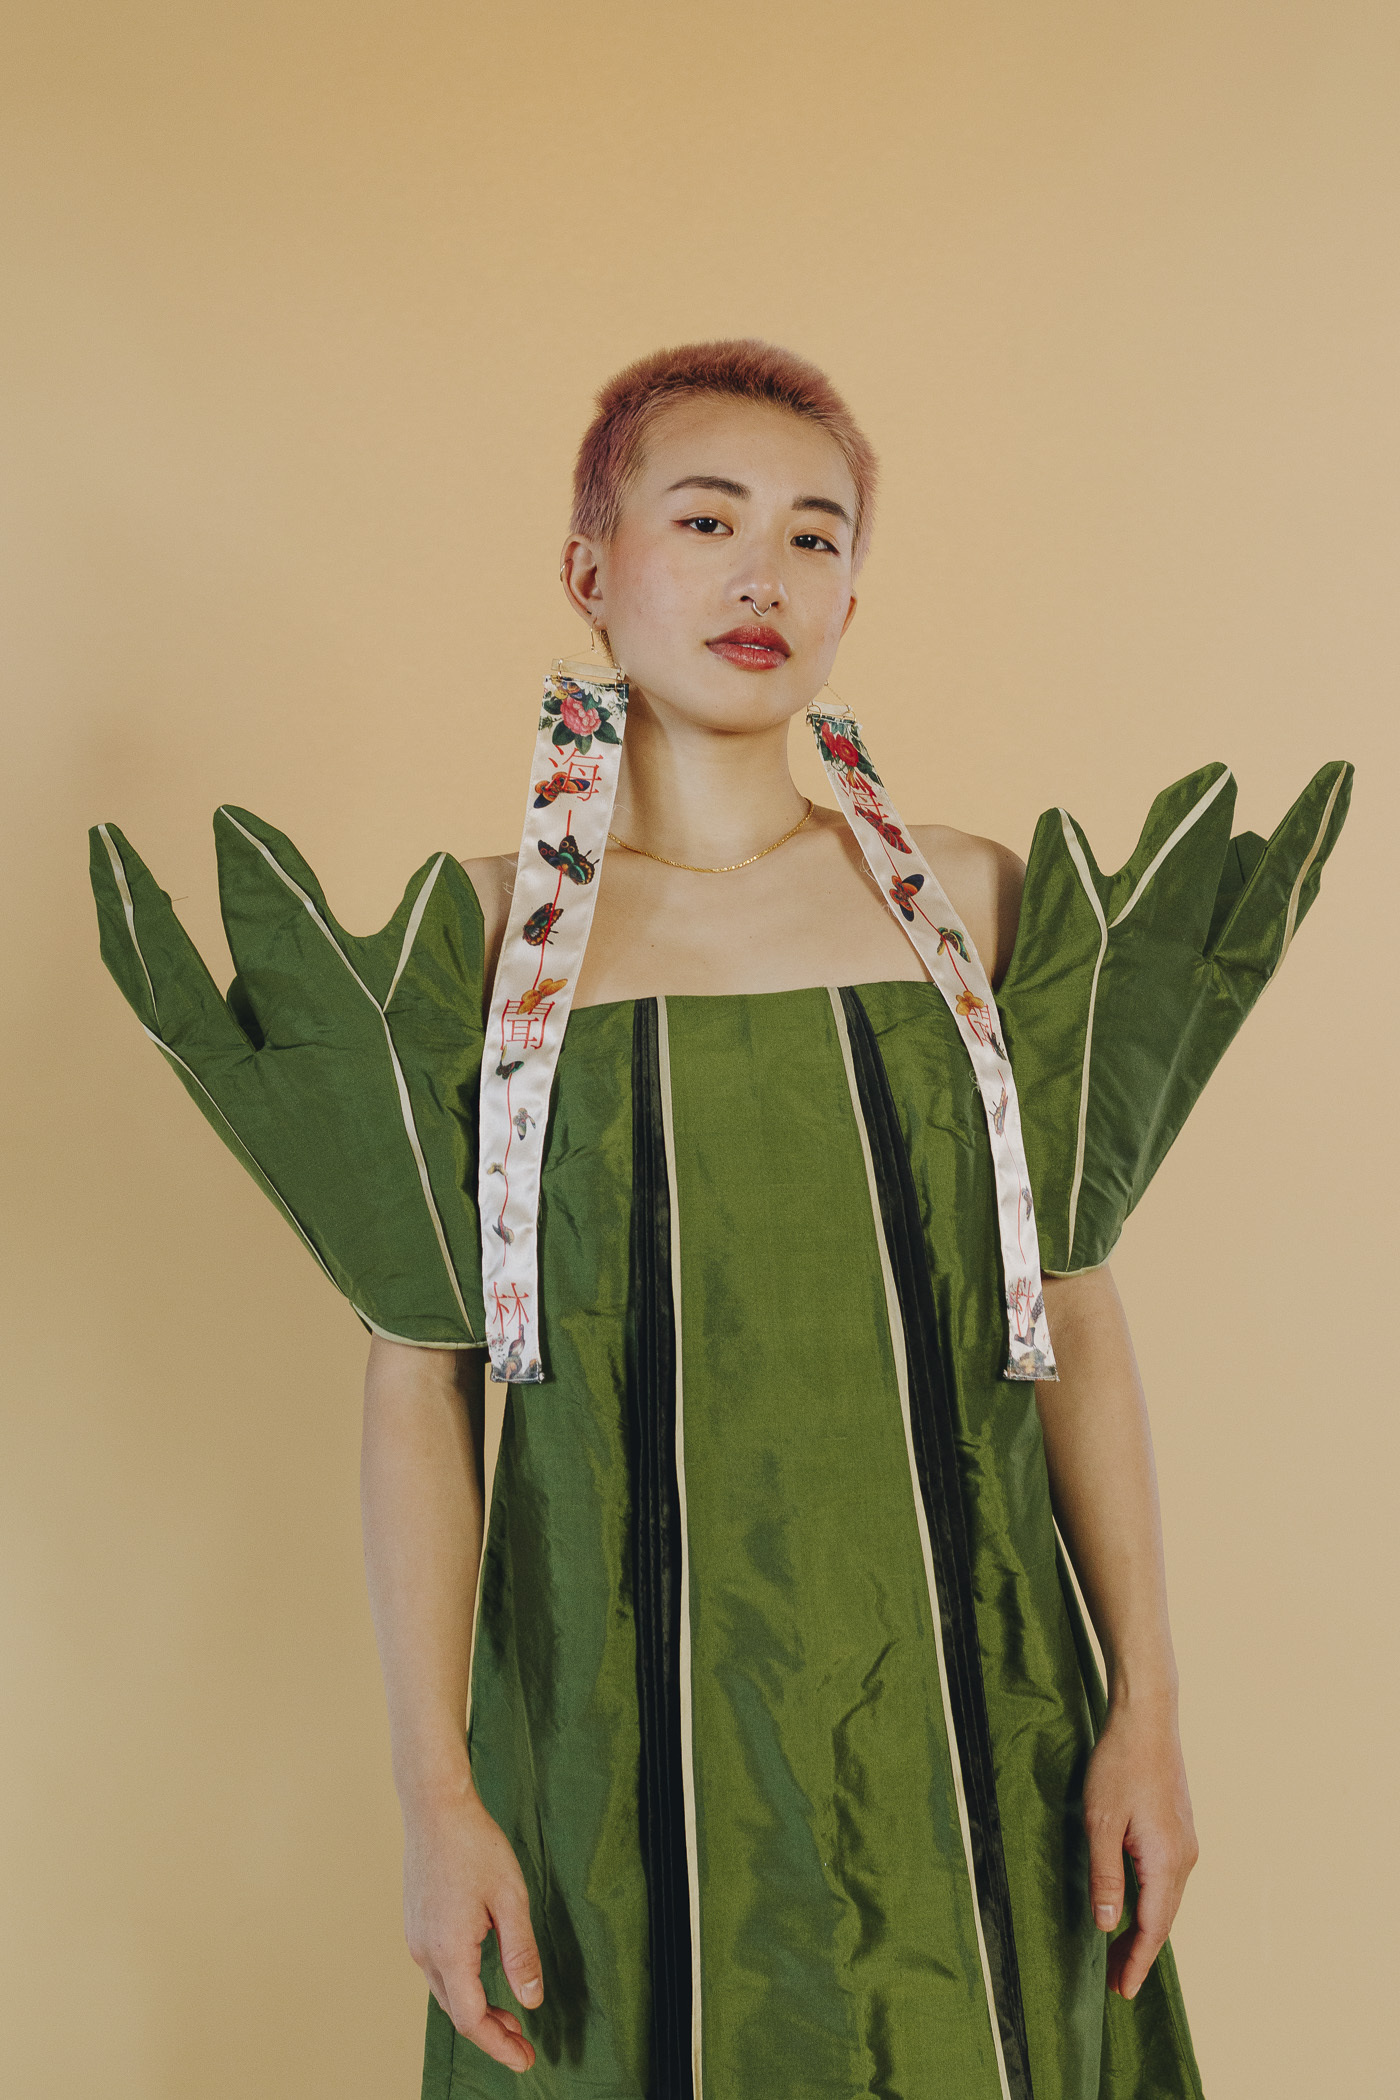 Closer image of Lucky's leaf-inspired dress. Long earring scrolls with butterflies are worn